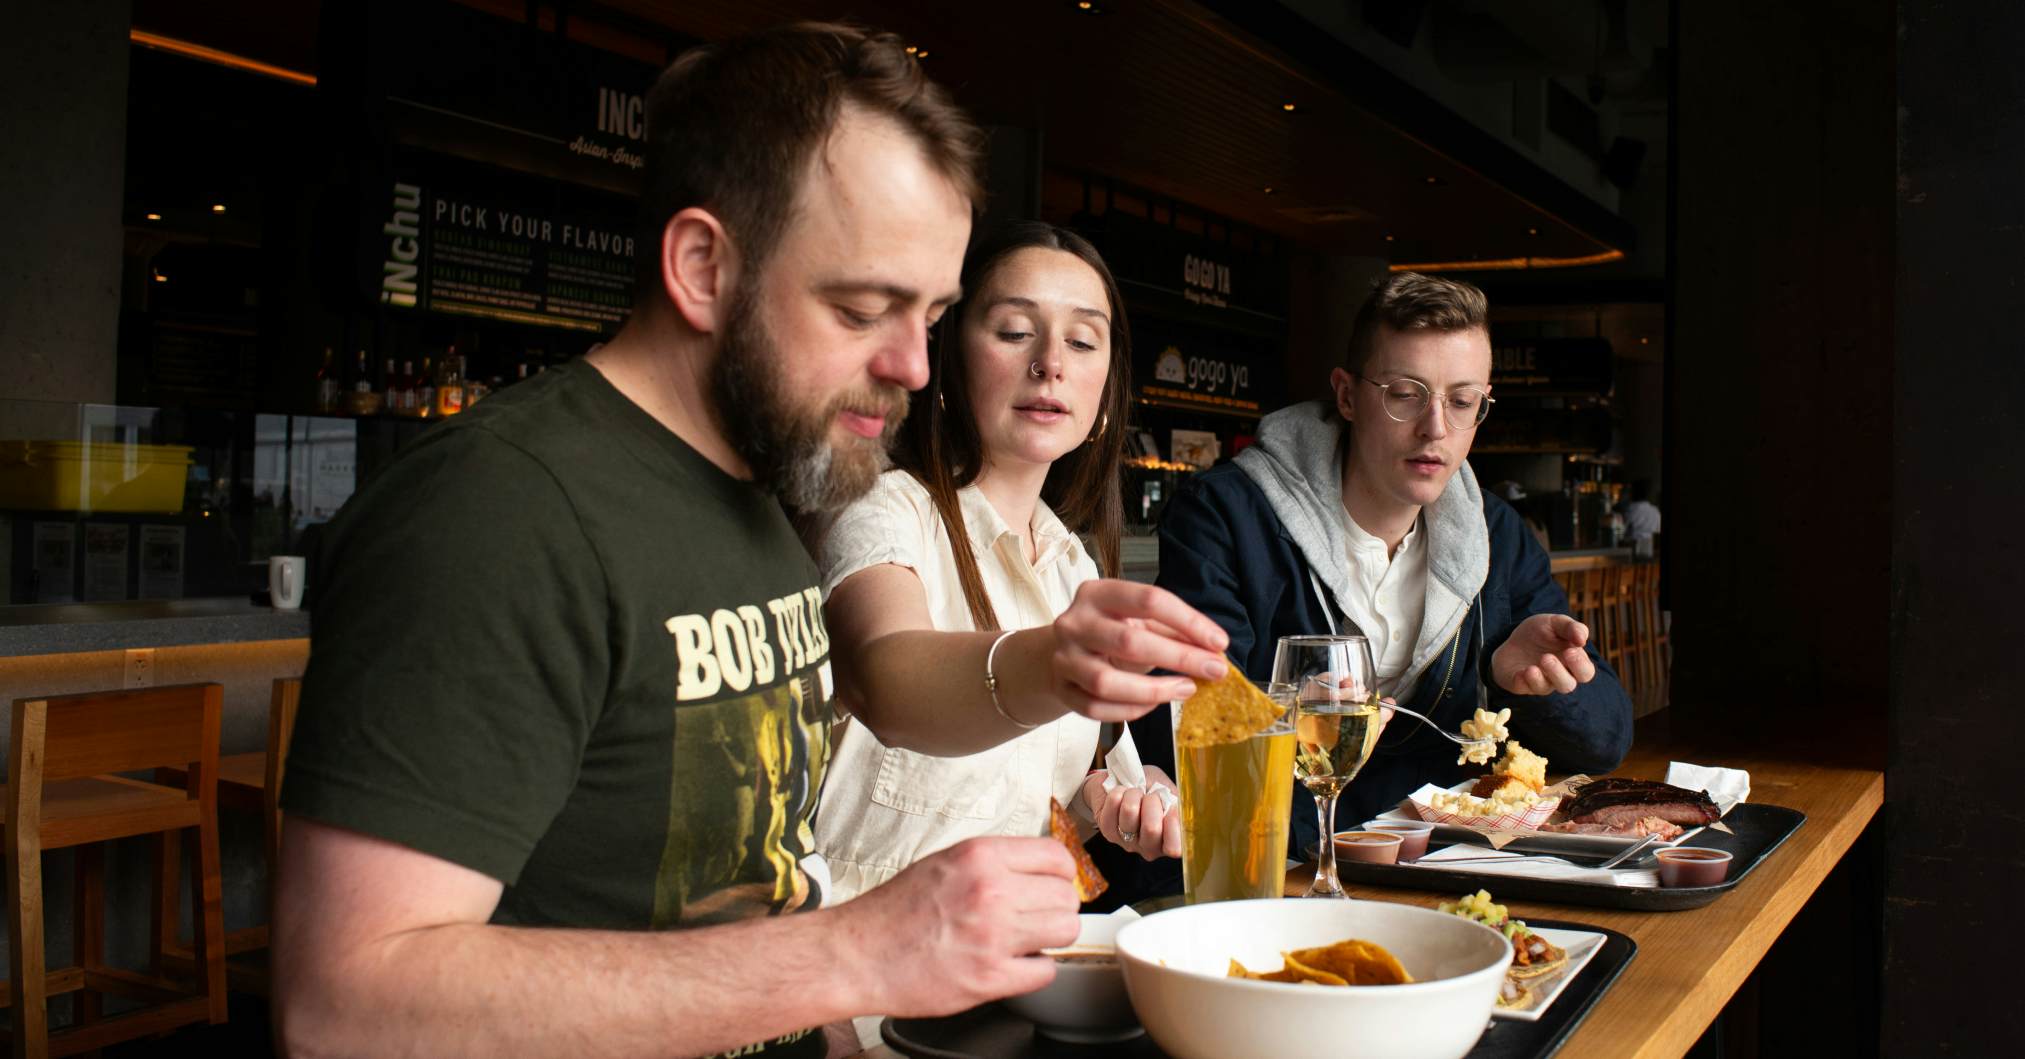 Group of three people eating at a restaurant.